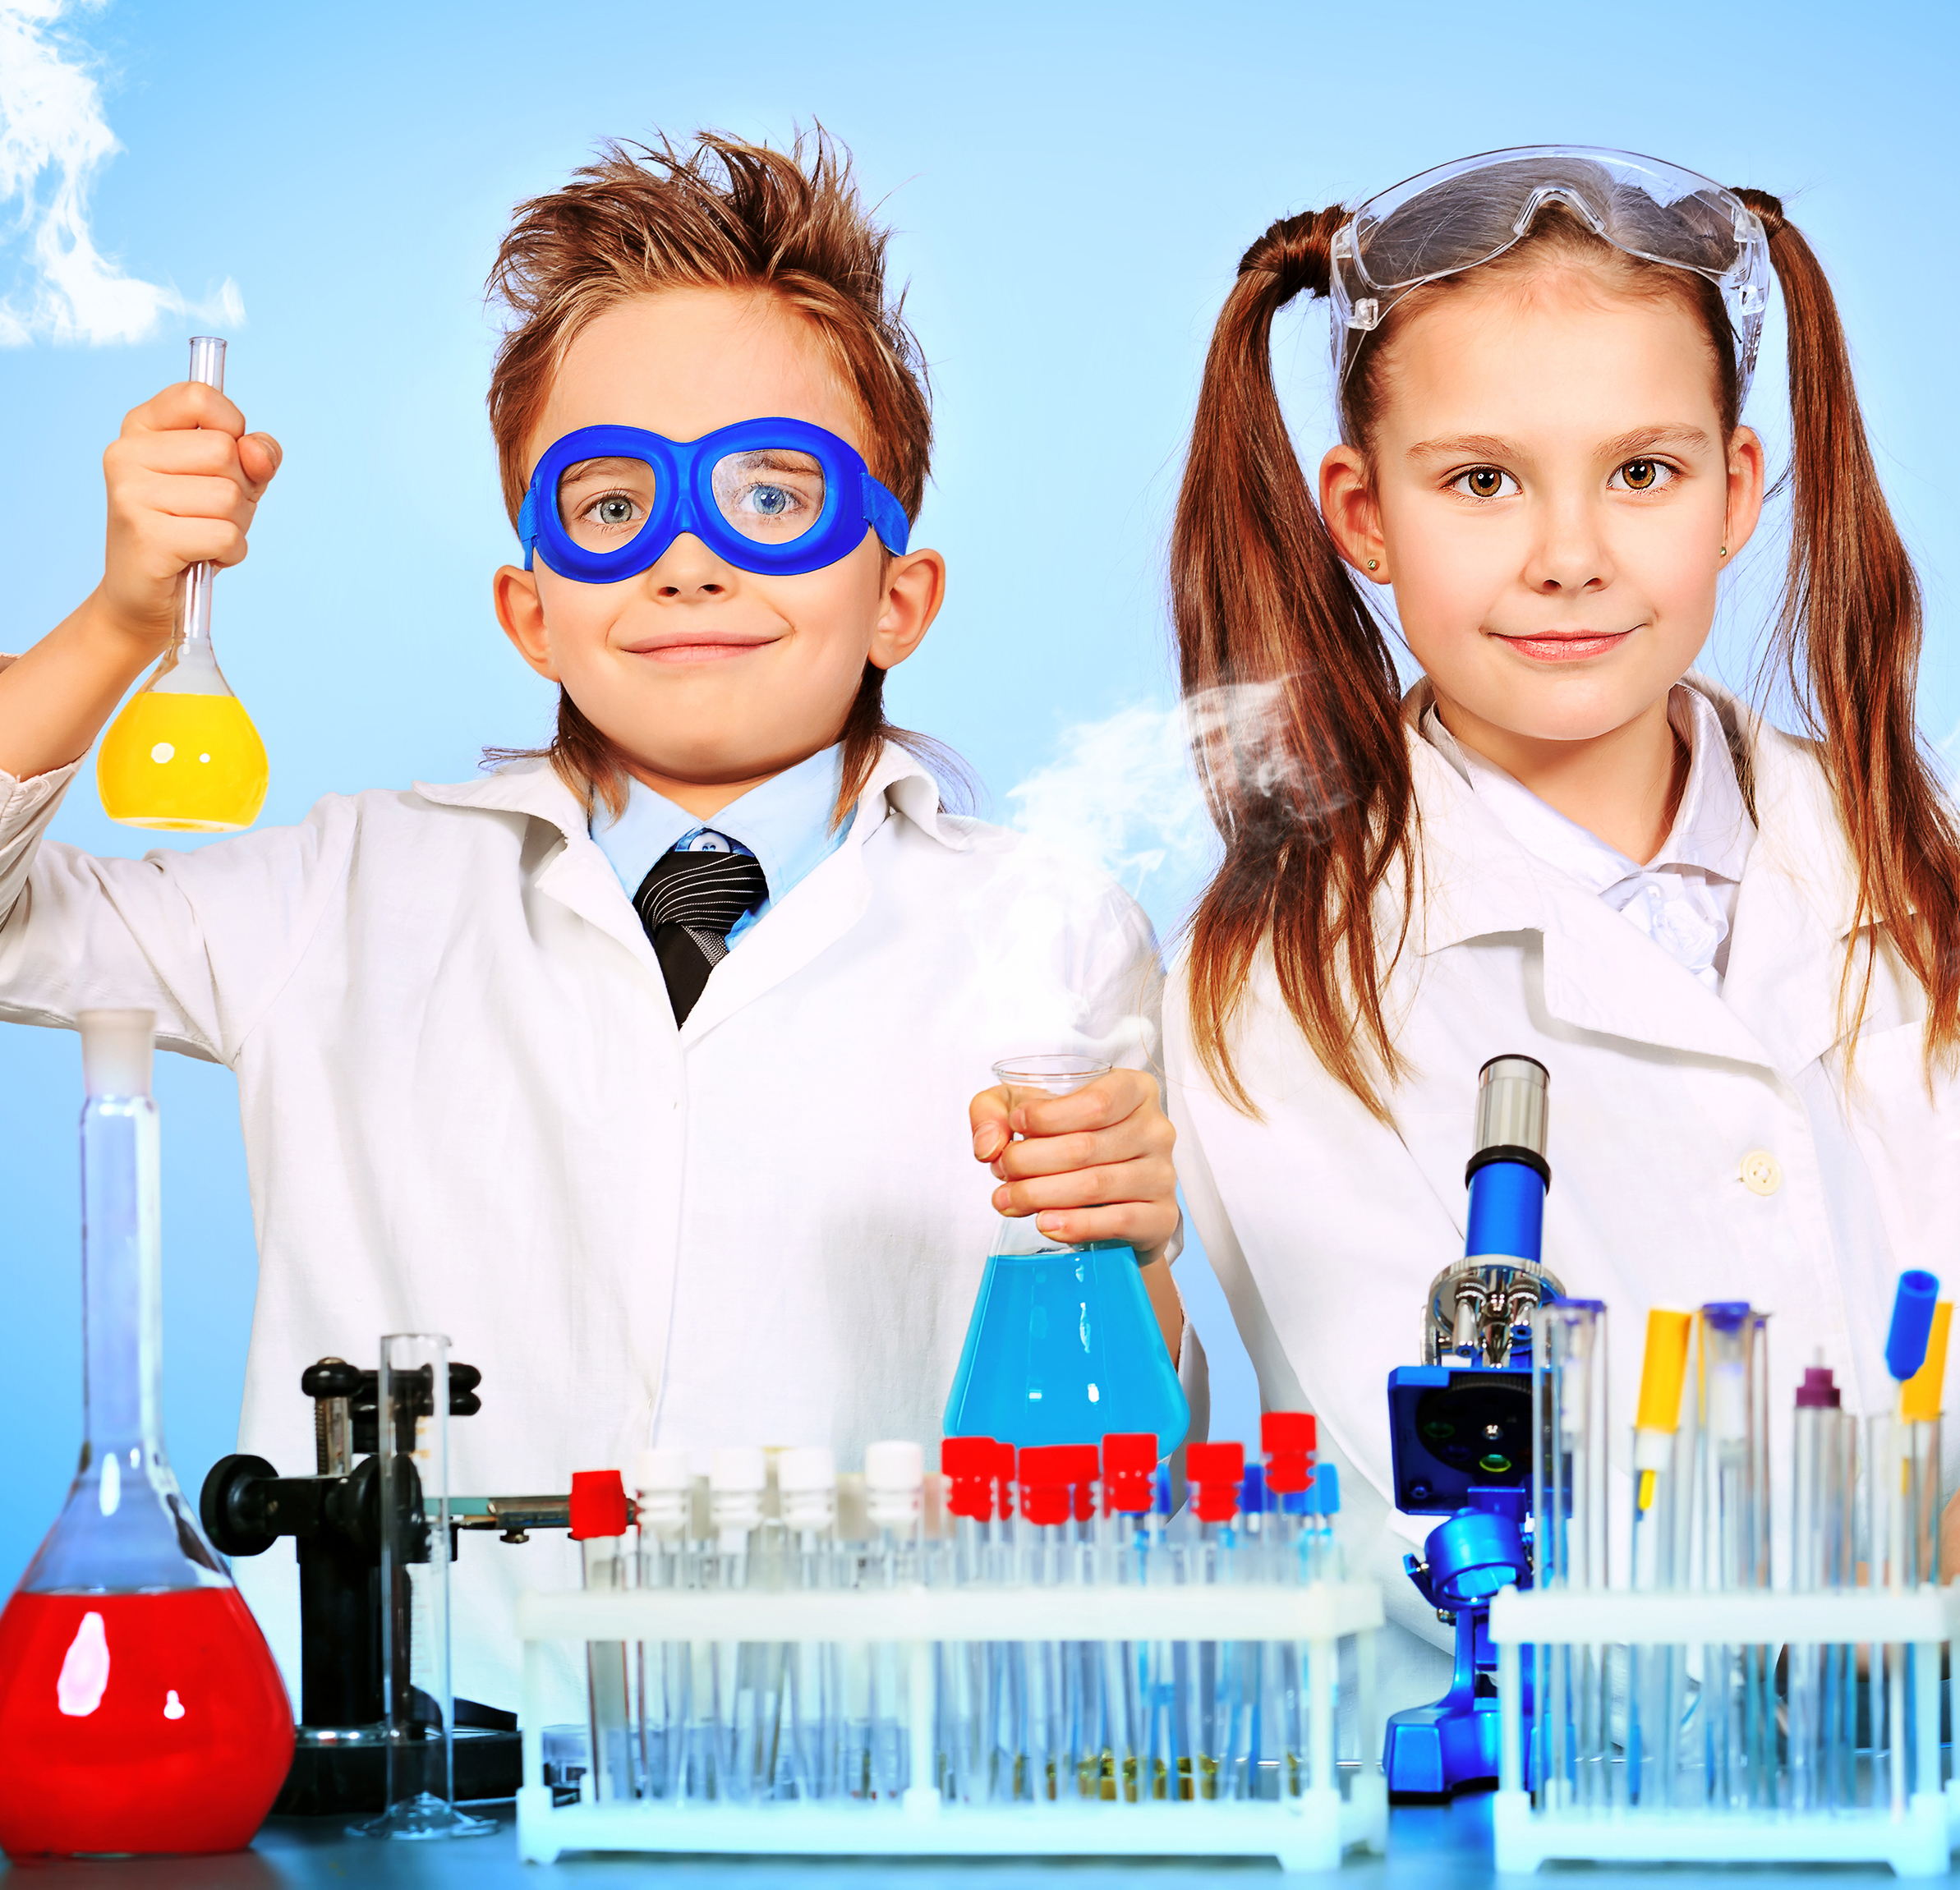 kids dressed as scientists with science lab materials around them